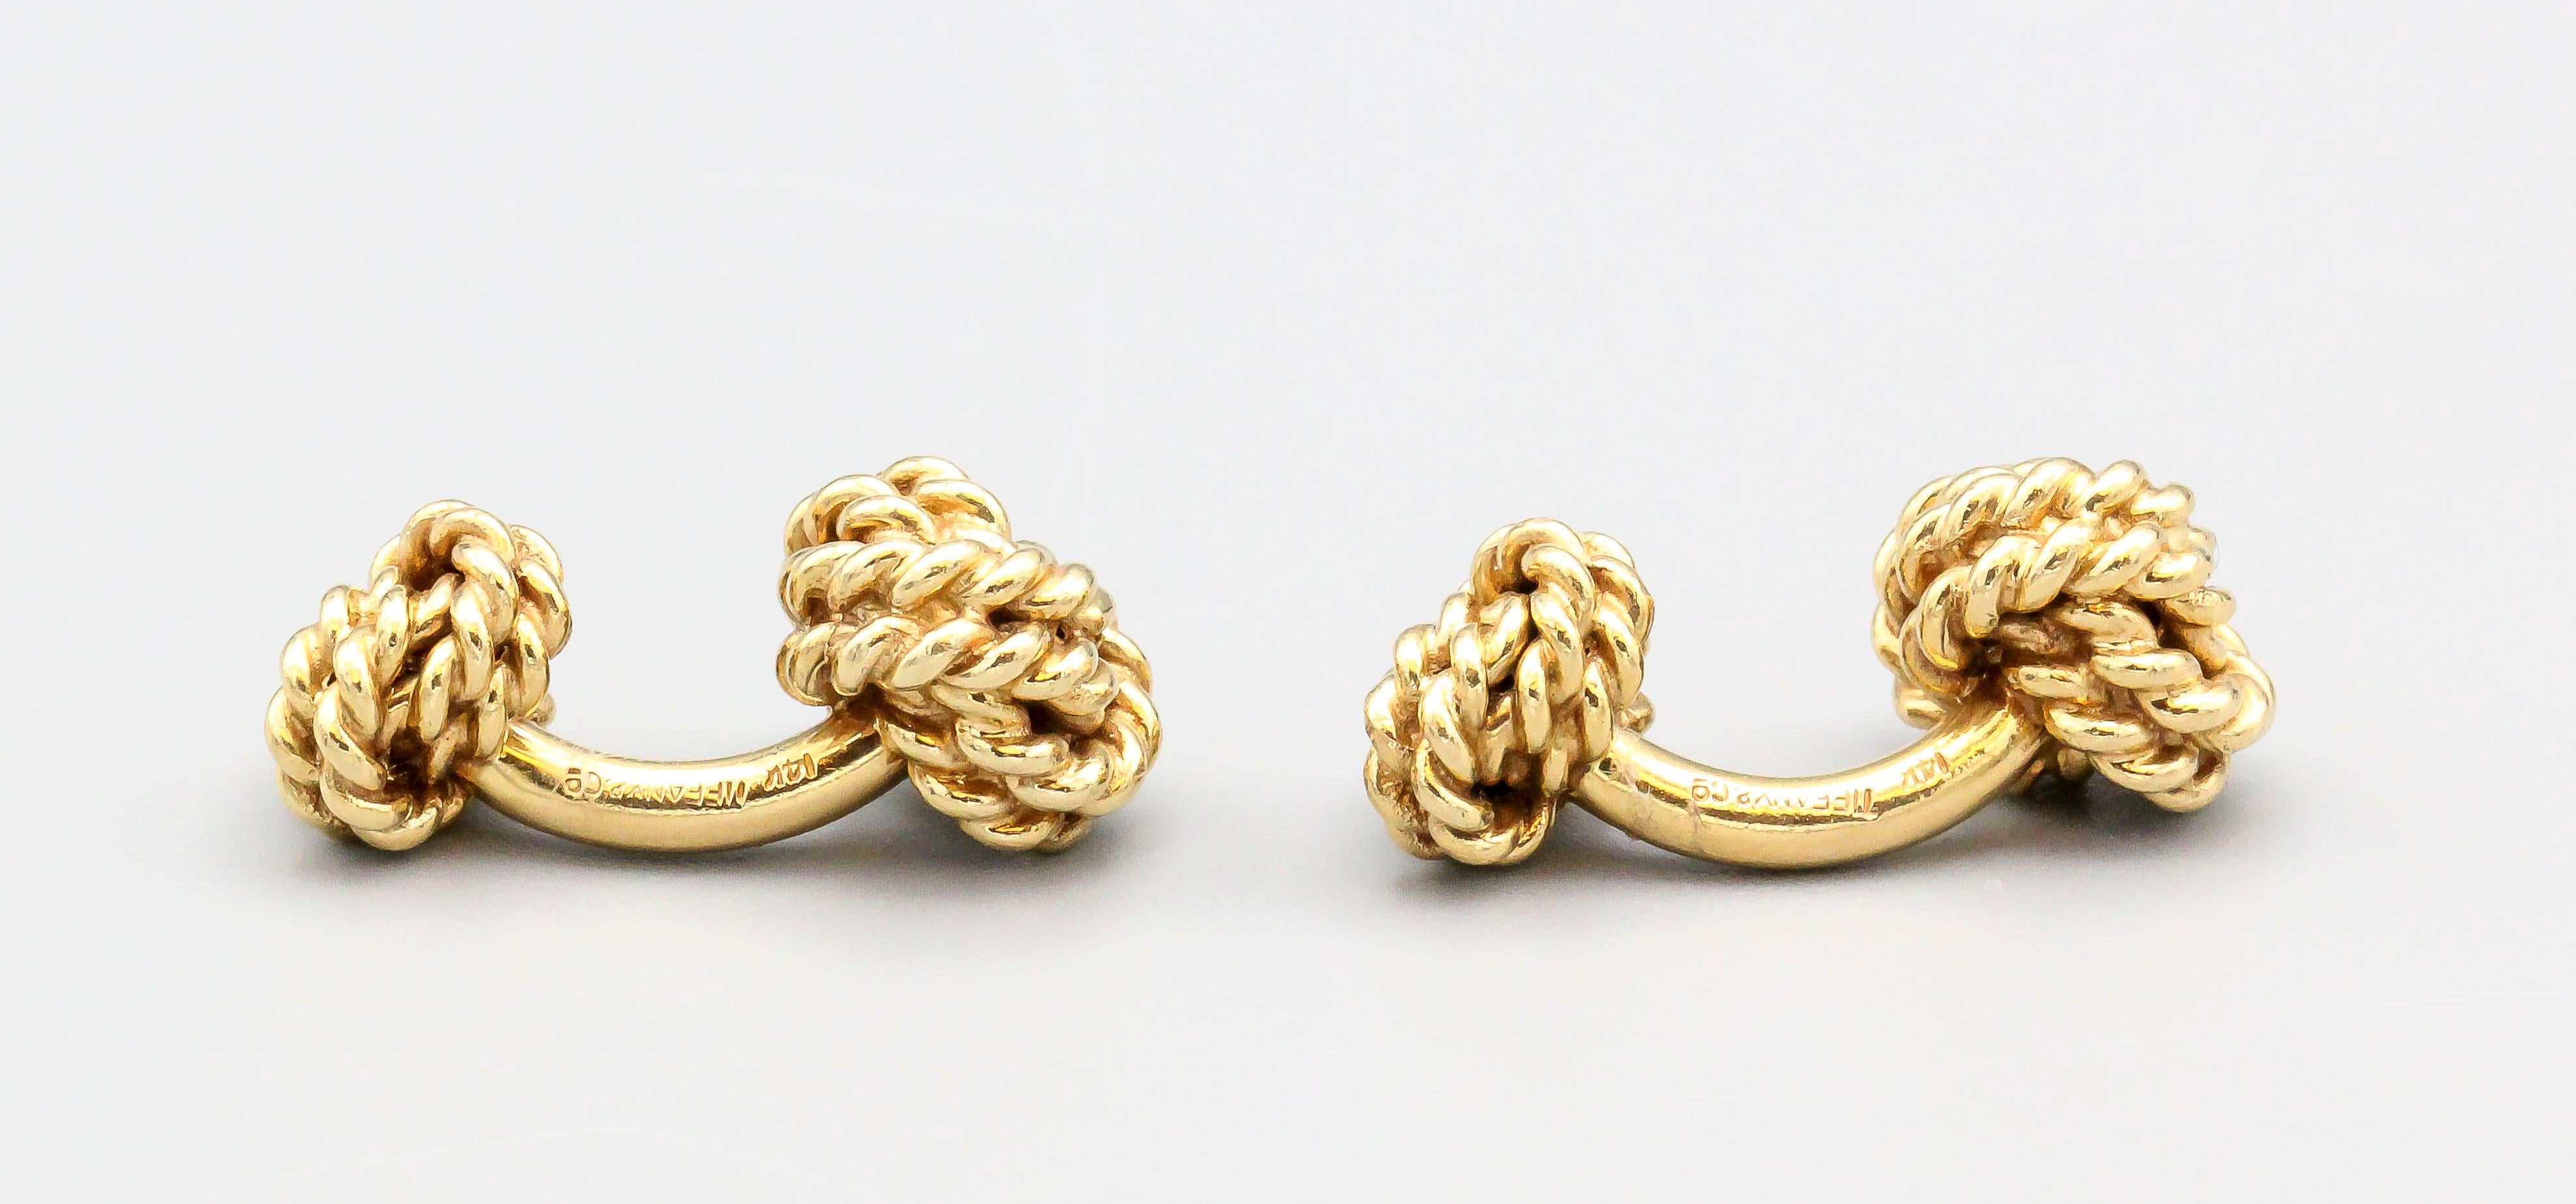 Fine pair of 14K yellow gold rope knot cufflinks by Tiffany & Co. Beautifully made and easy to wear.  

Hallmarks: Tiffany & Co., 14k.